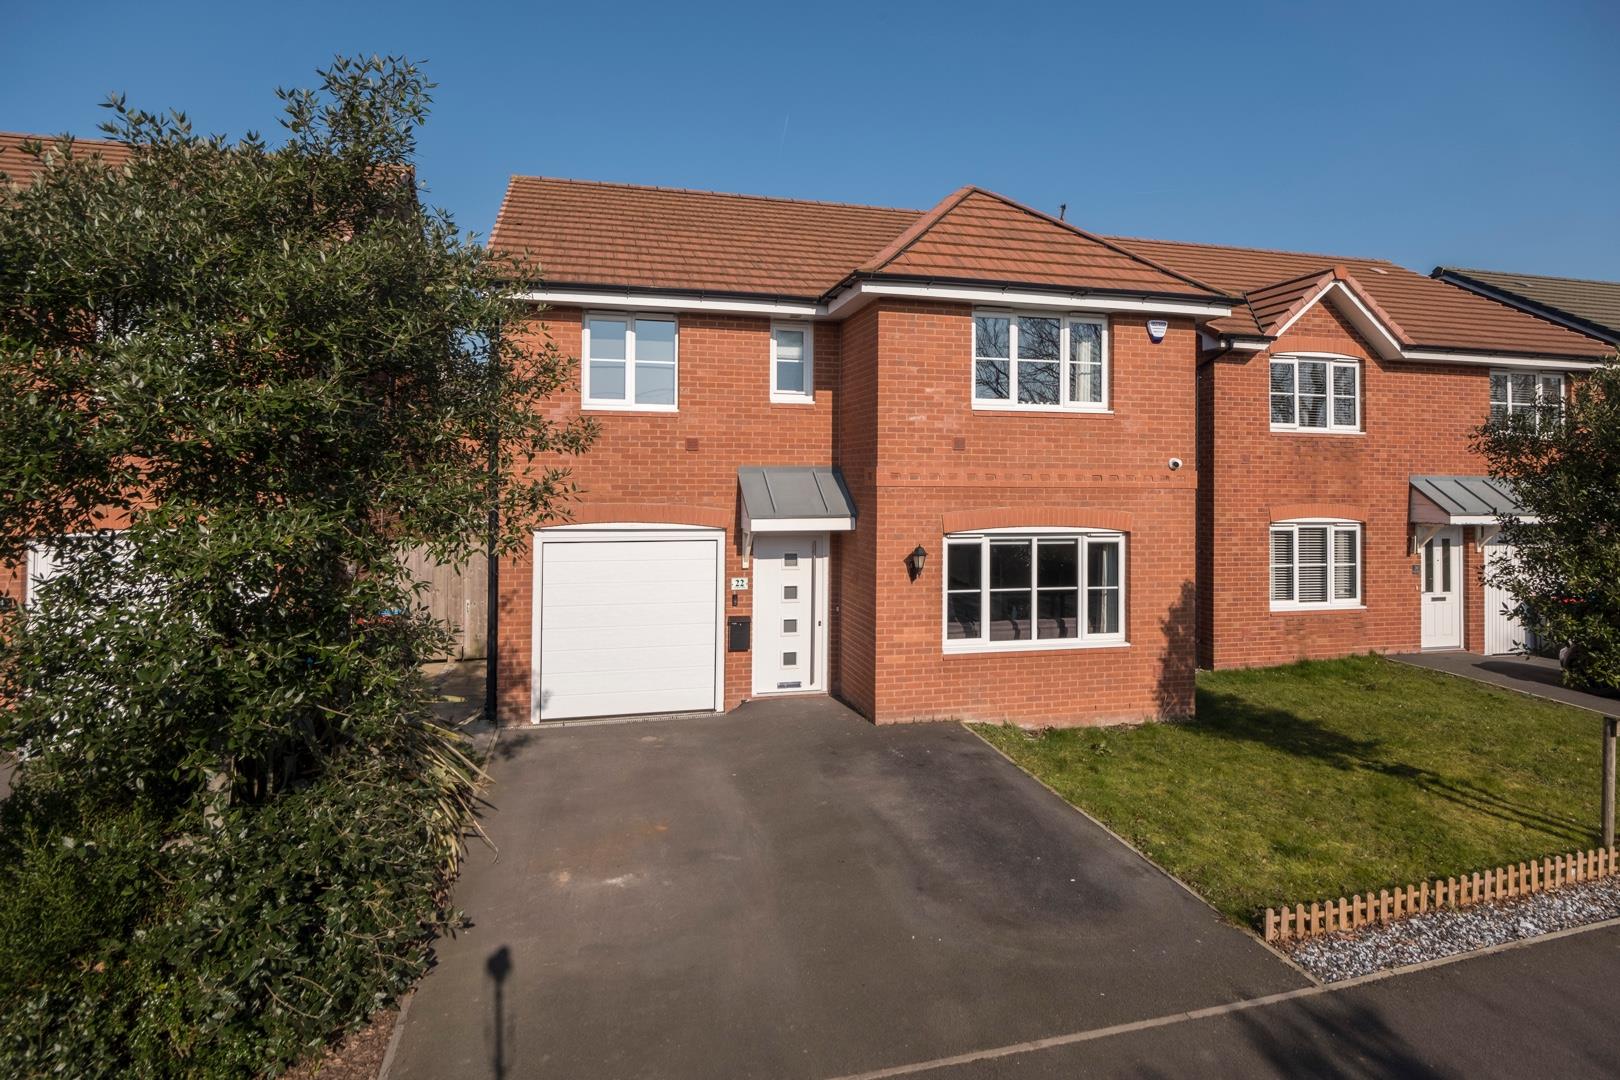 4 bedroom  Detached House for Sale in Rudheath